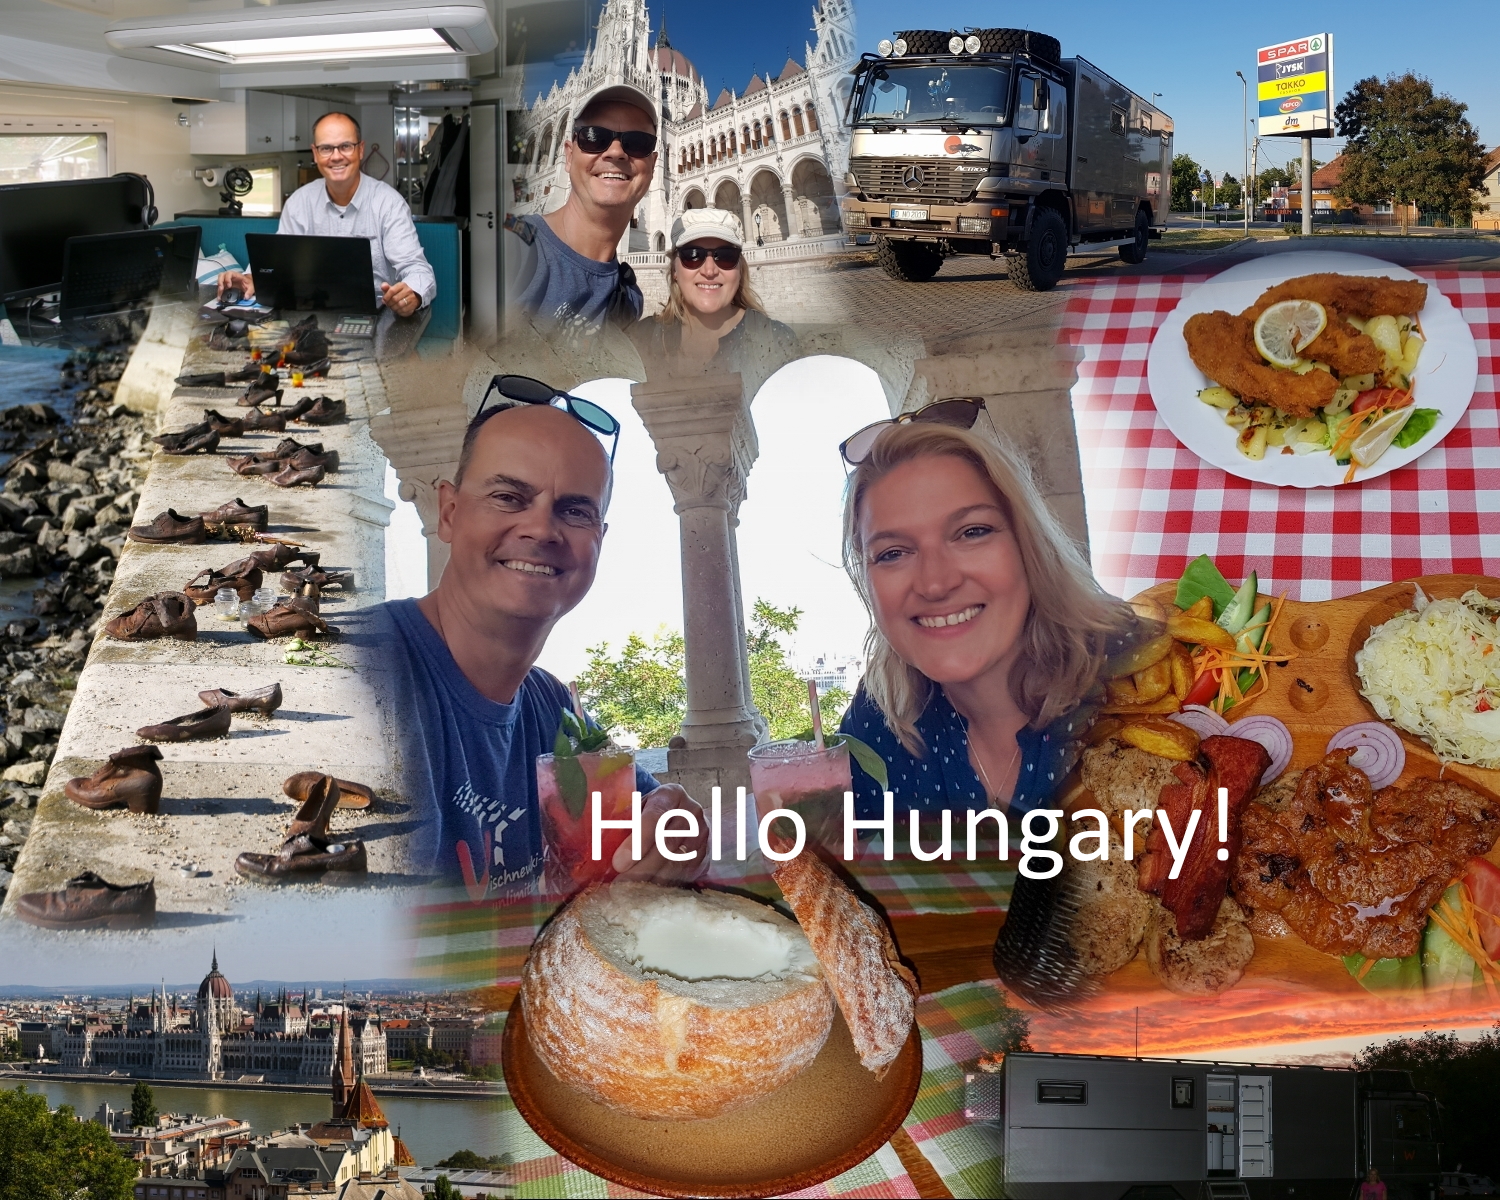 <span  class="uc_style_uc_tiles_grid_image_elementor_uc_items_attribute_title" style="color:#ffffff;">Hello Hungary!</span>